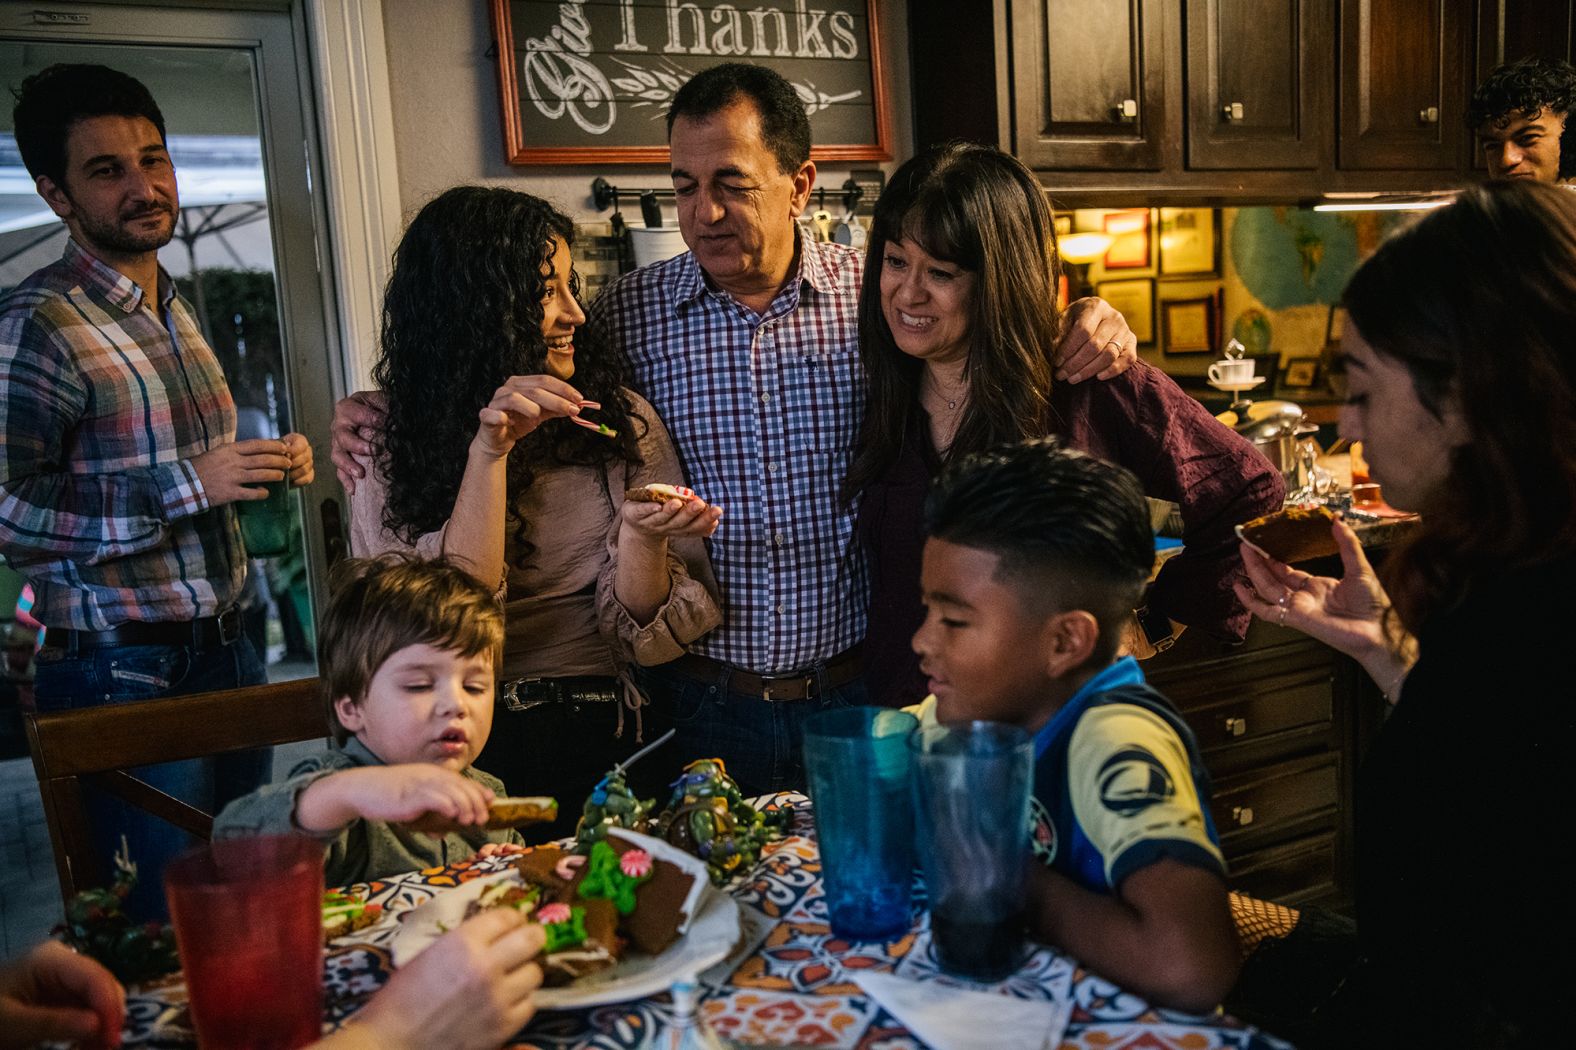 Members of the Villagrana-Ocasio, Parish Moreno and Yagar Dalton families bond together after a Thanksgiving meal in Houston on Thursday. "As happy as I am to have everyone back together, we've experienced so much during the pandemic that in someways it feels that we're almost holding back from truly being able to celebrate," Carlos Villagrana said. "This is our first time having our families come together, and although we're happy and fortunate to be able to share this time, there's this uncertainty in not knowing even what next week will look like. We're happy, but are also very aware of how quickly things can change and are stepping very lightly into the future."